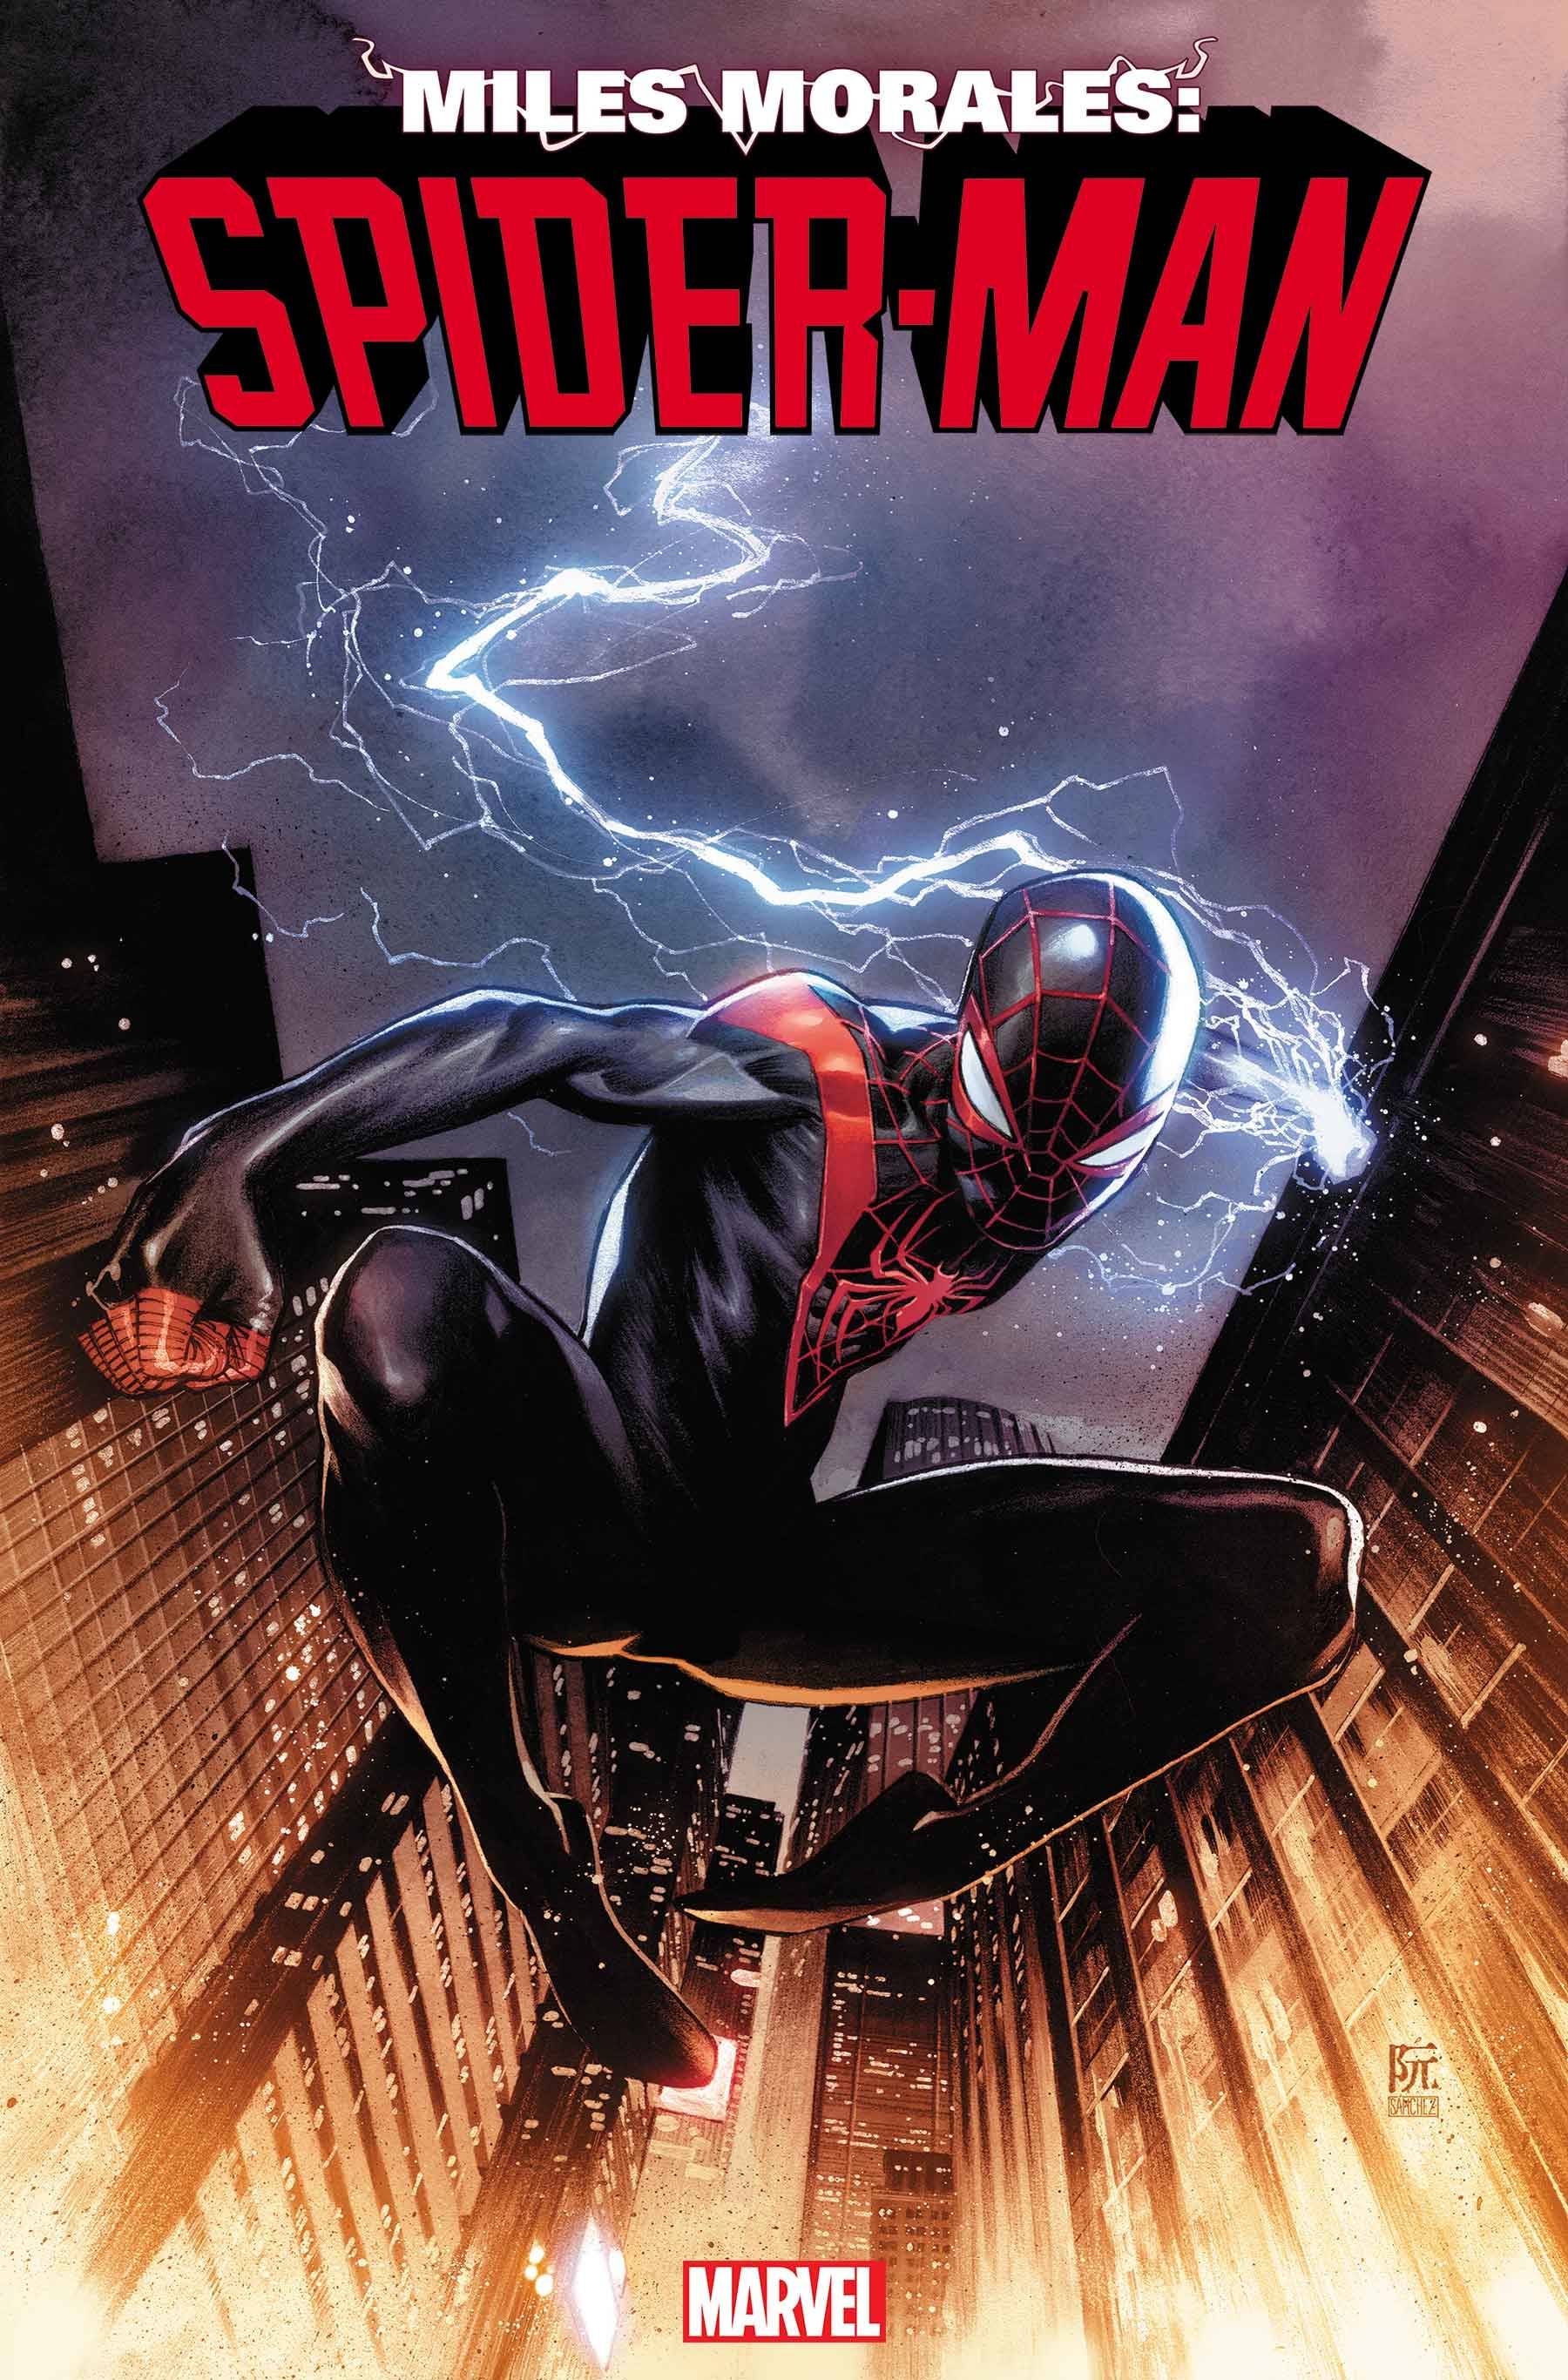 OCT220801 - MILES MORALES SPIDER-MAN #1 - Previews World